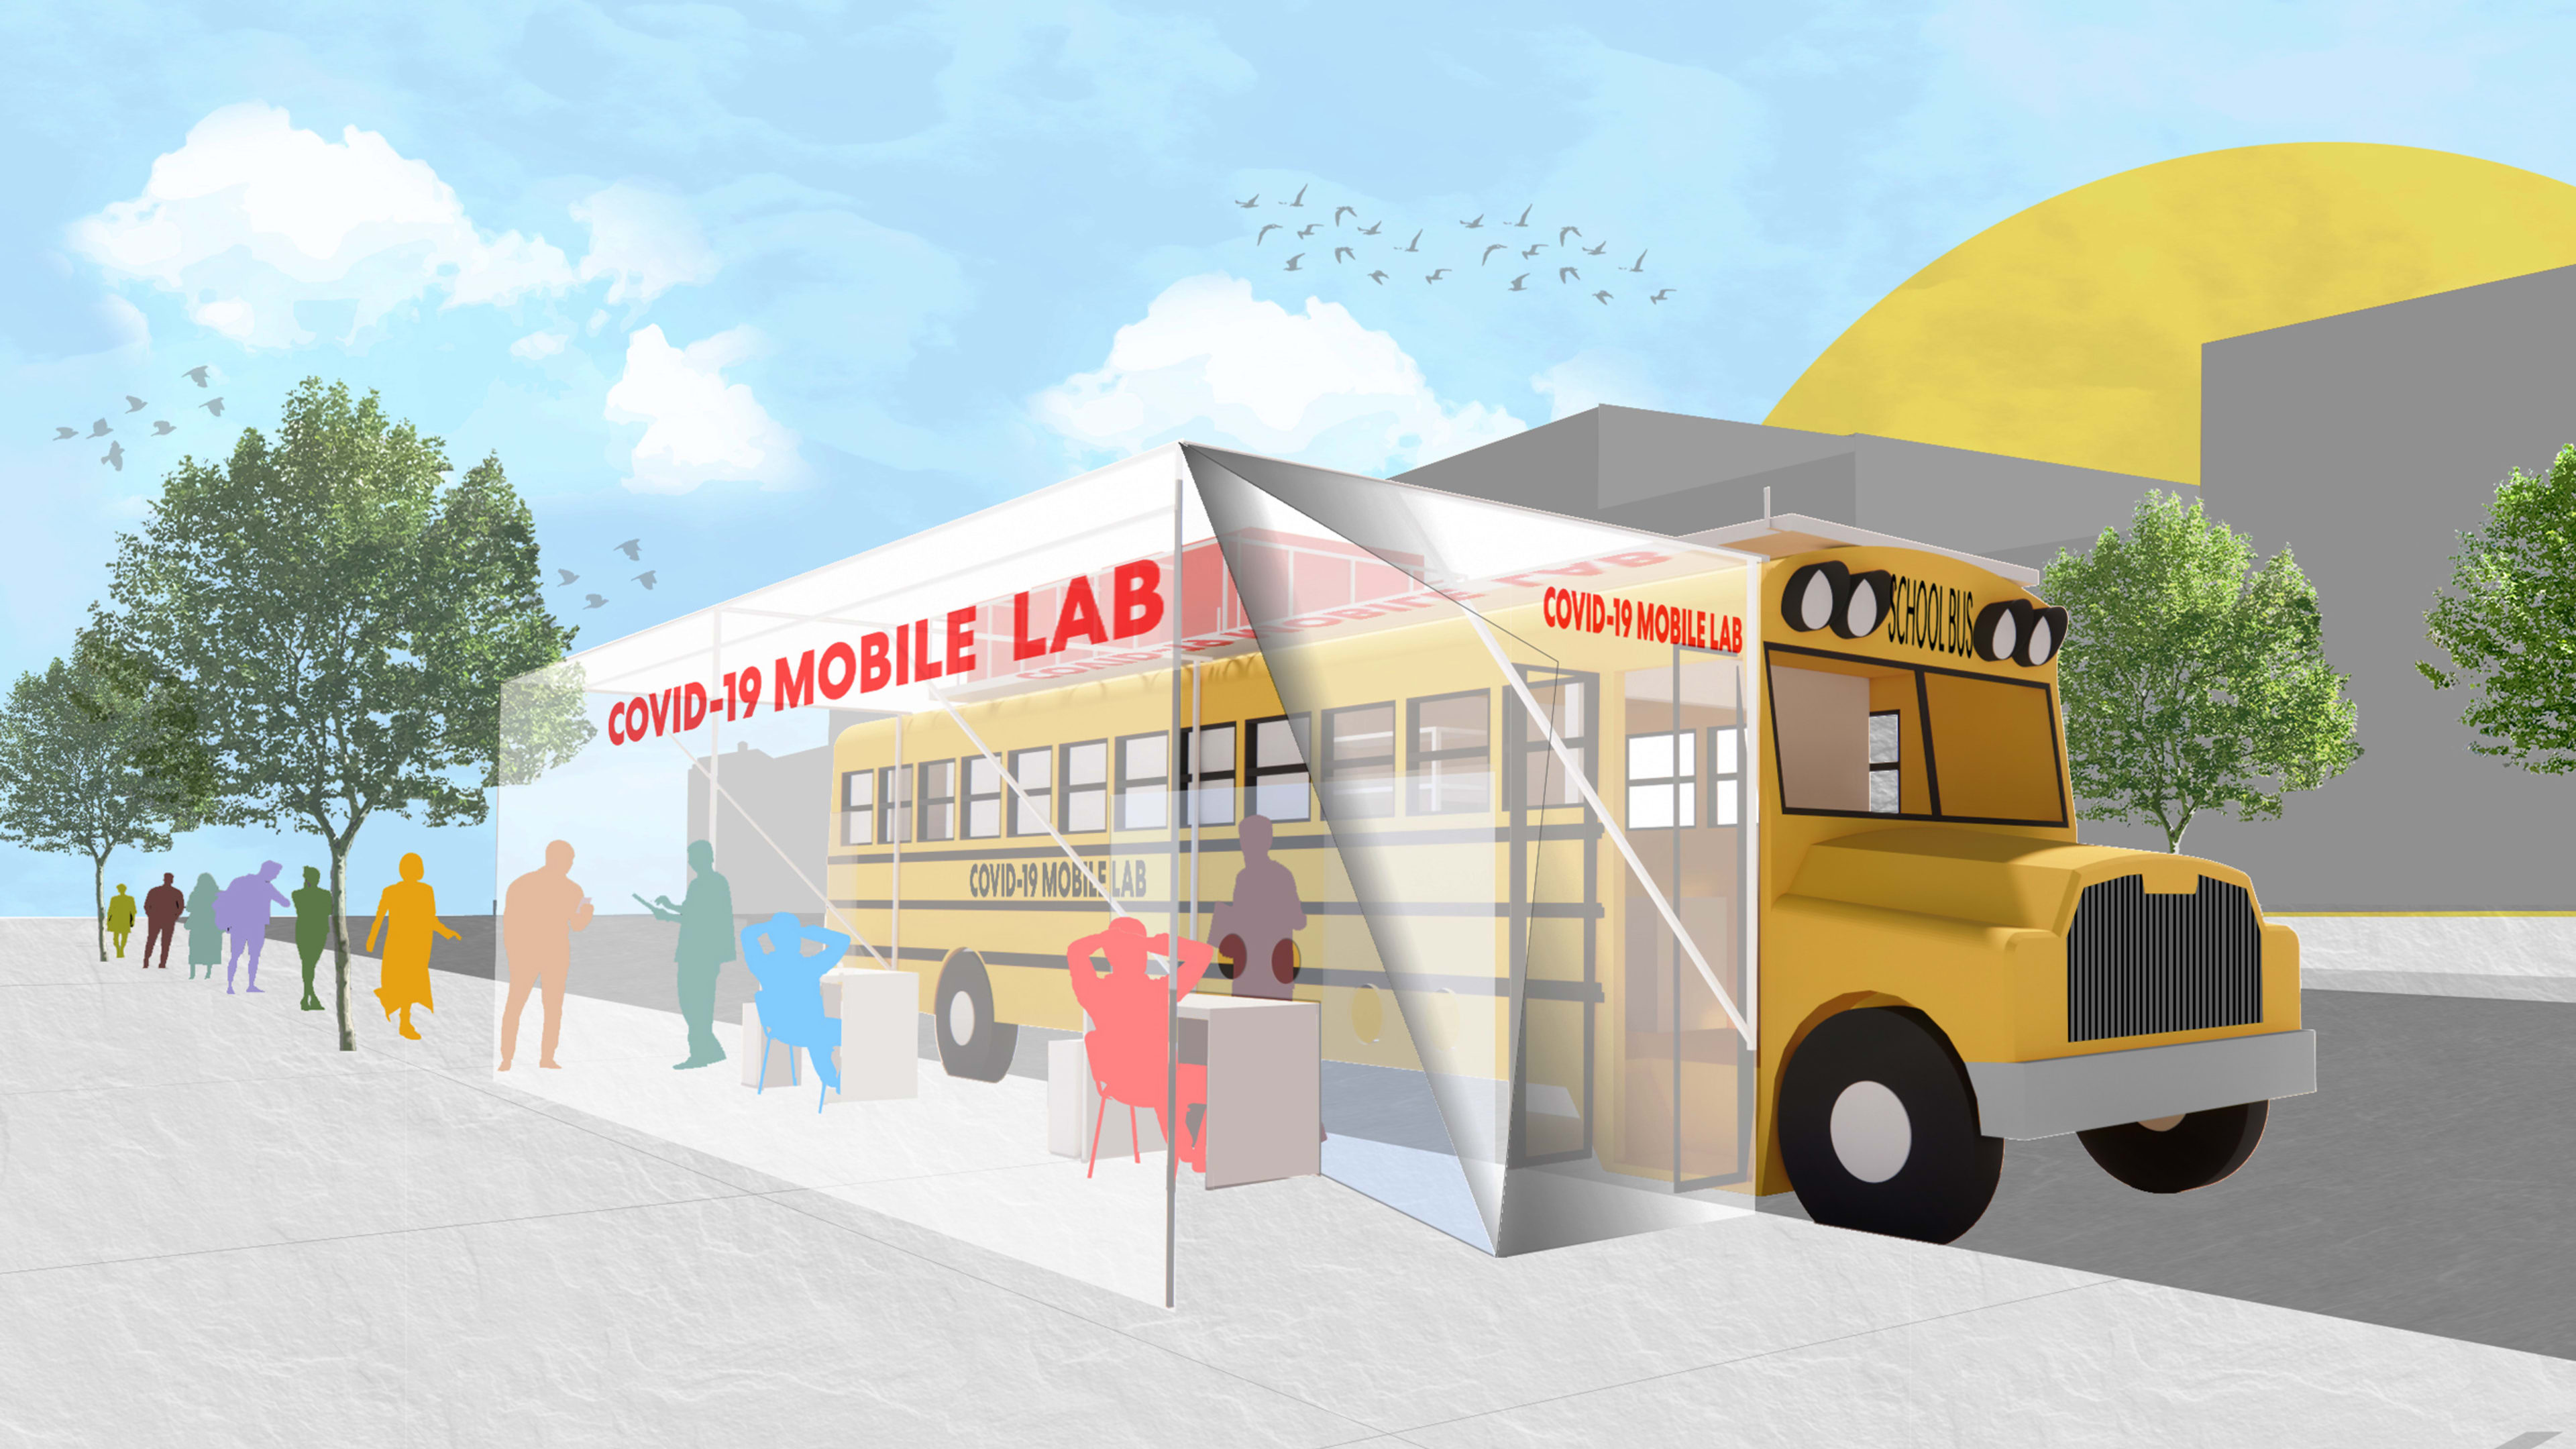 We could turn out-of-use school buses into low-cost mobile COVID test labs